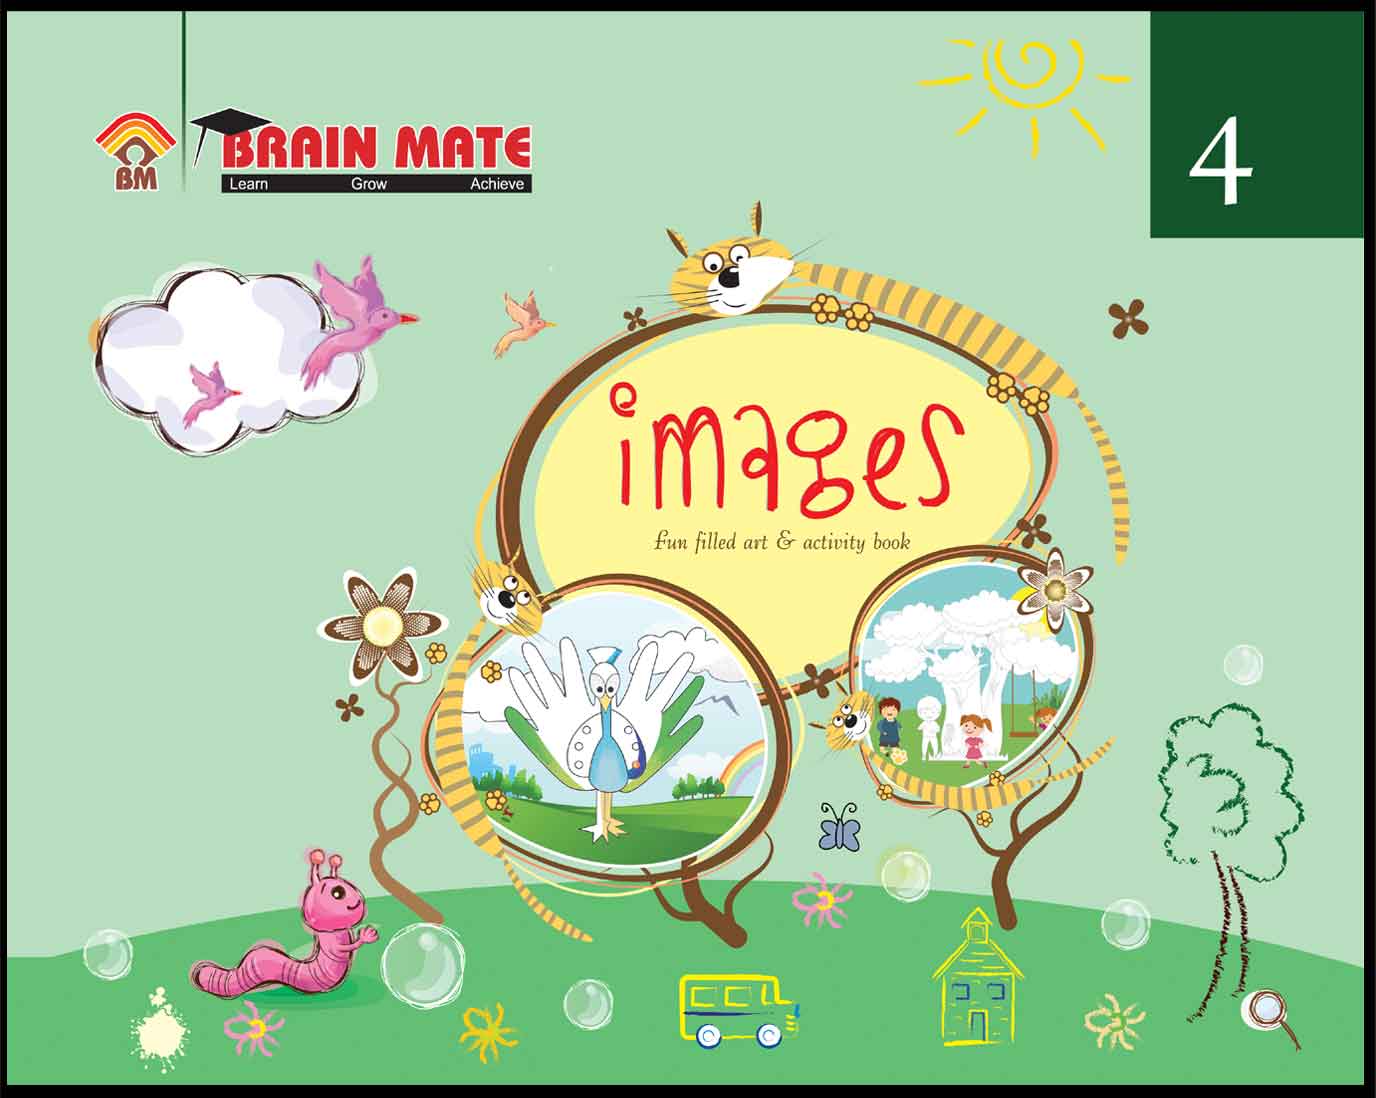 brainmate of Images_4